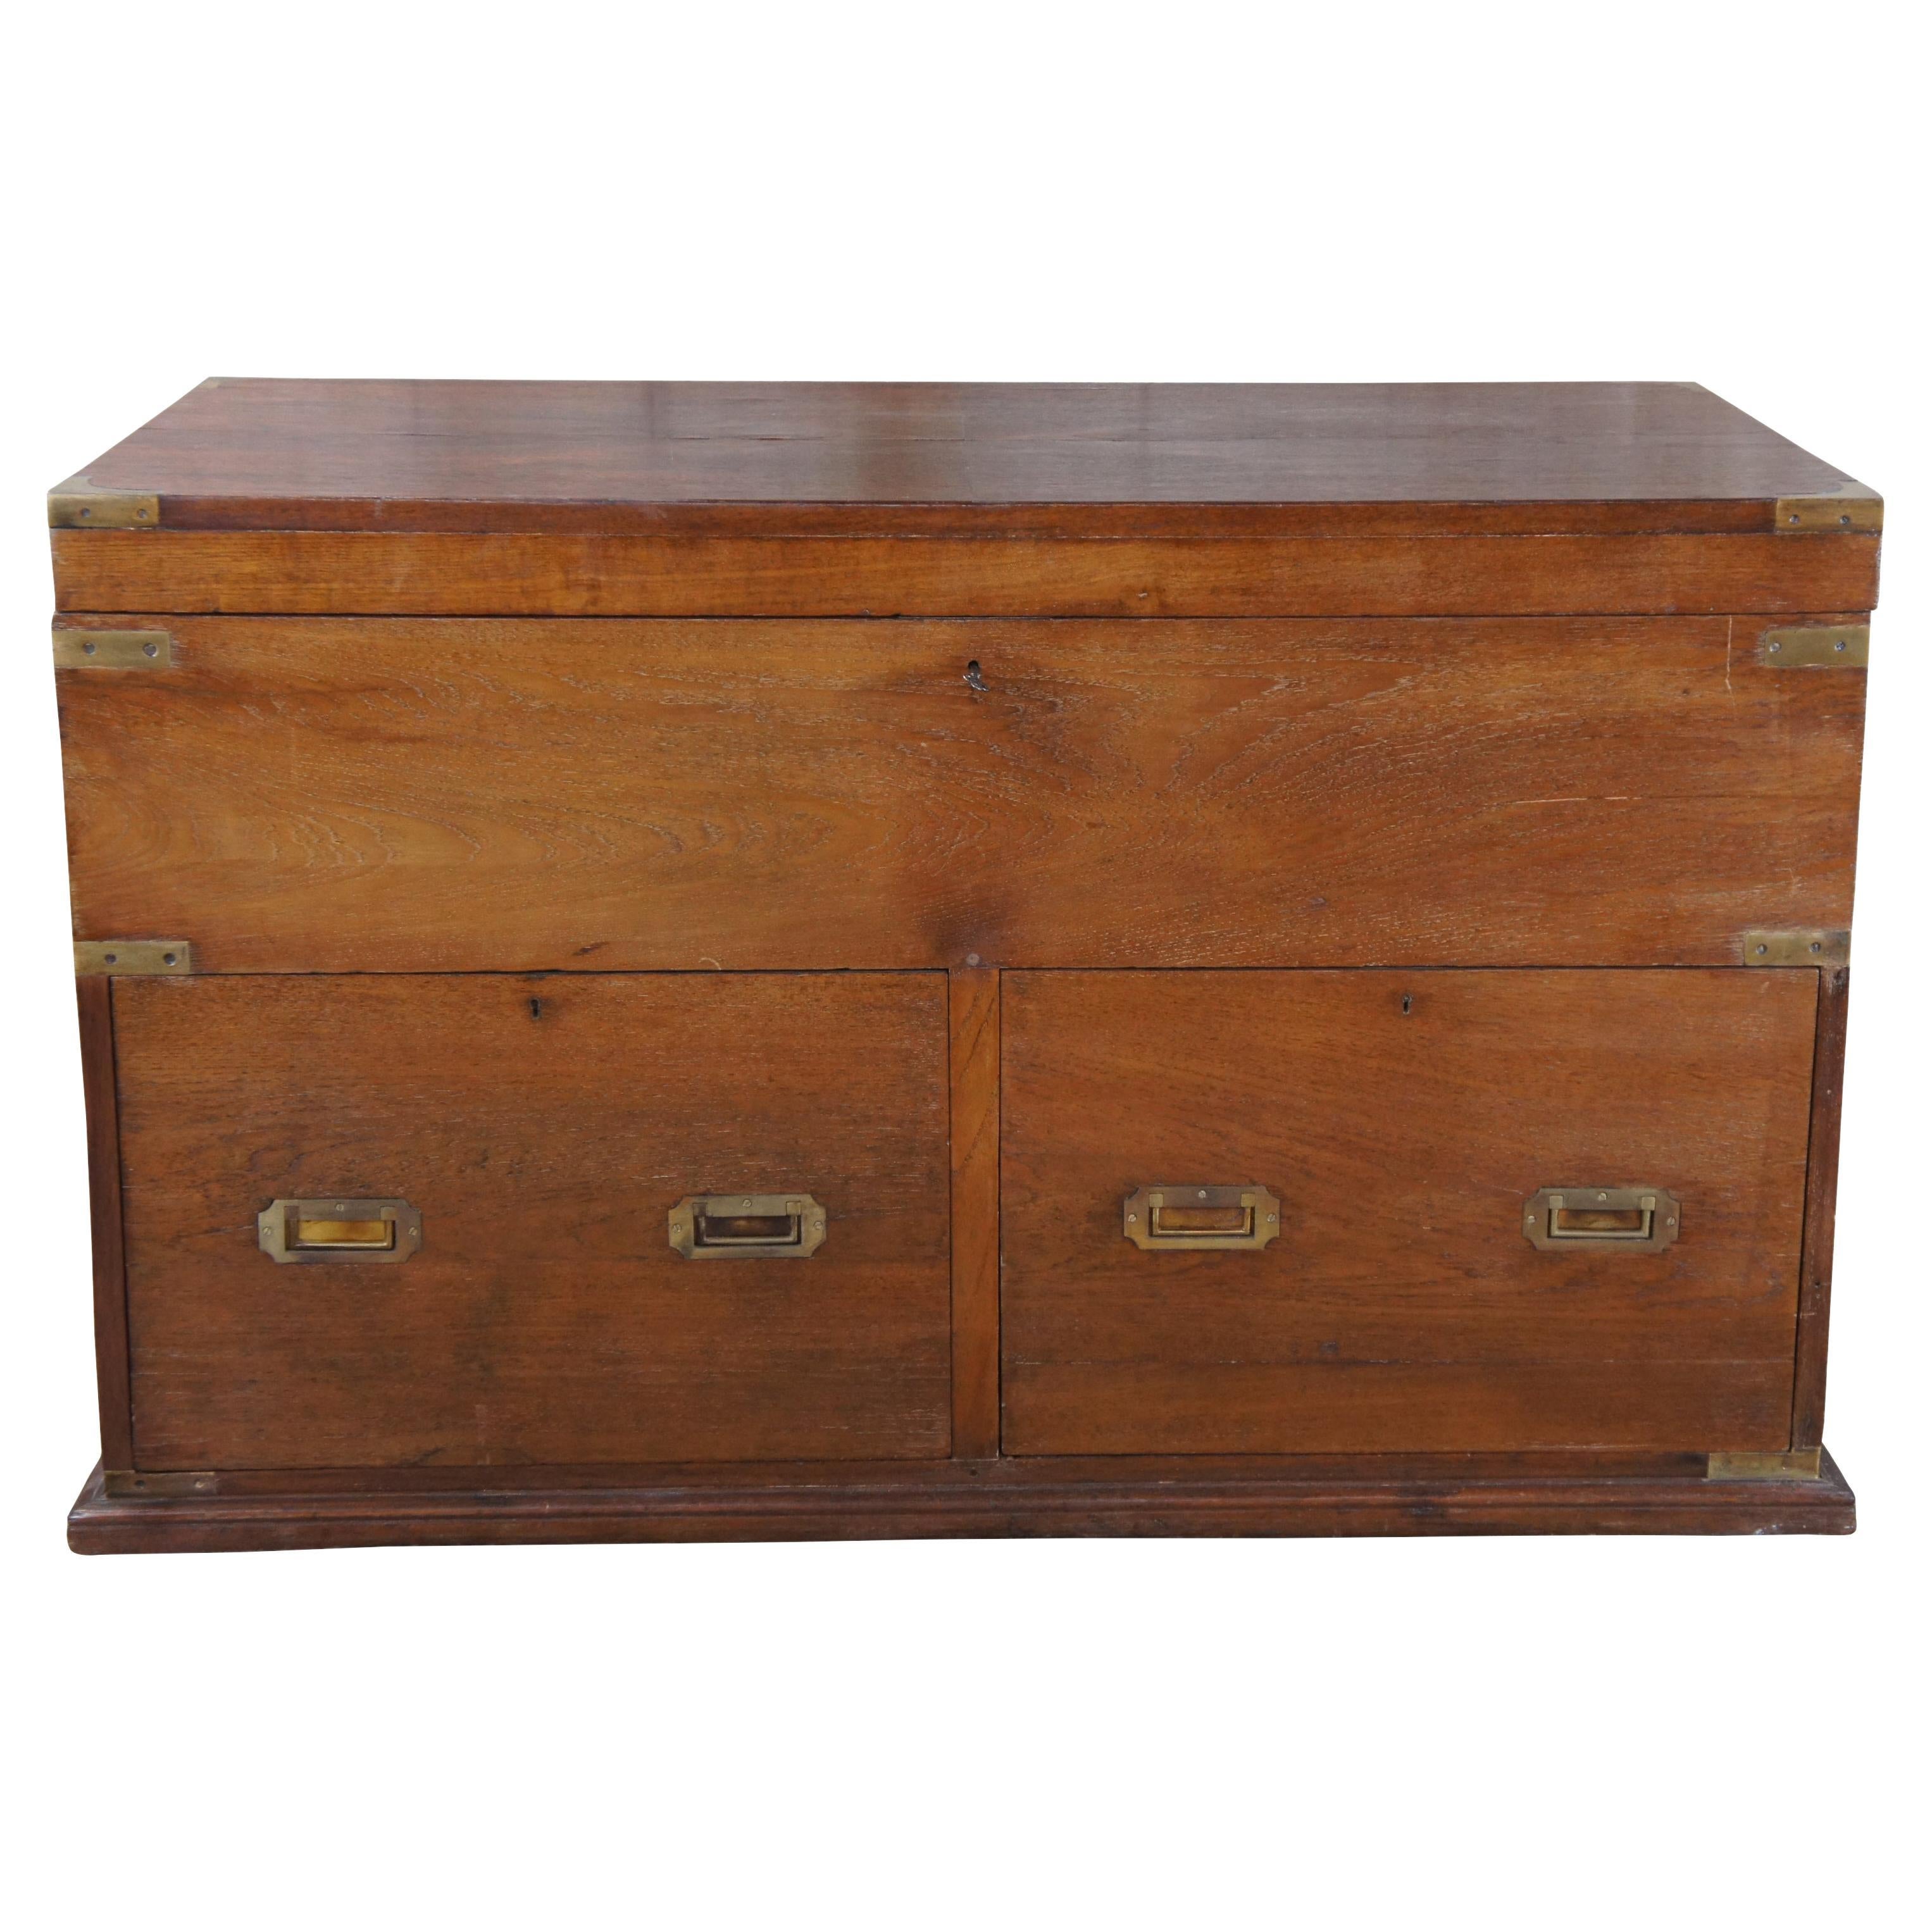 Antique English / British Colonial campaign trunk or chest, circa 1850s. Made of camphor featuring rectangular form with upper storage trunk and lower drawers. Accented with brass banding, hand dovetailing and handles. Very heavy.

Campaign